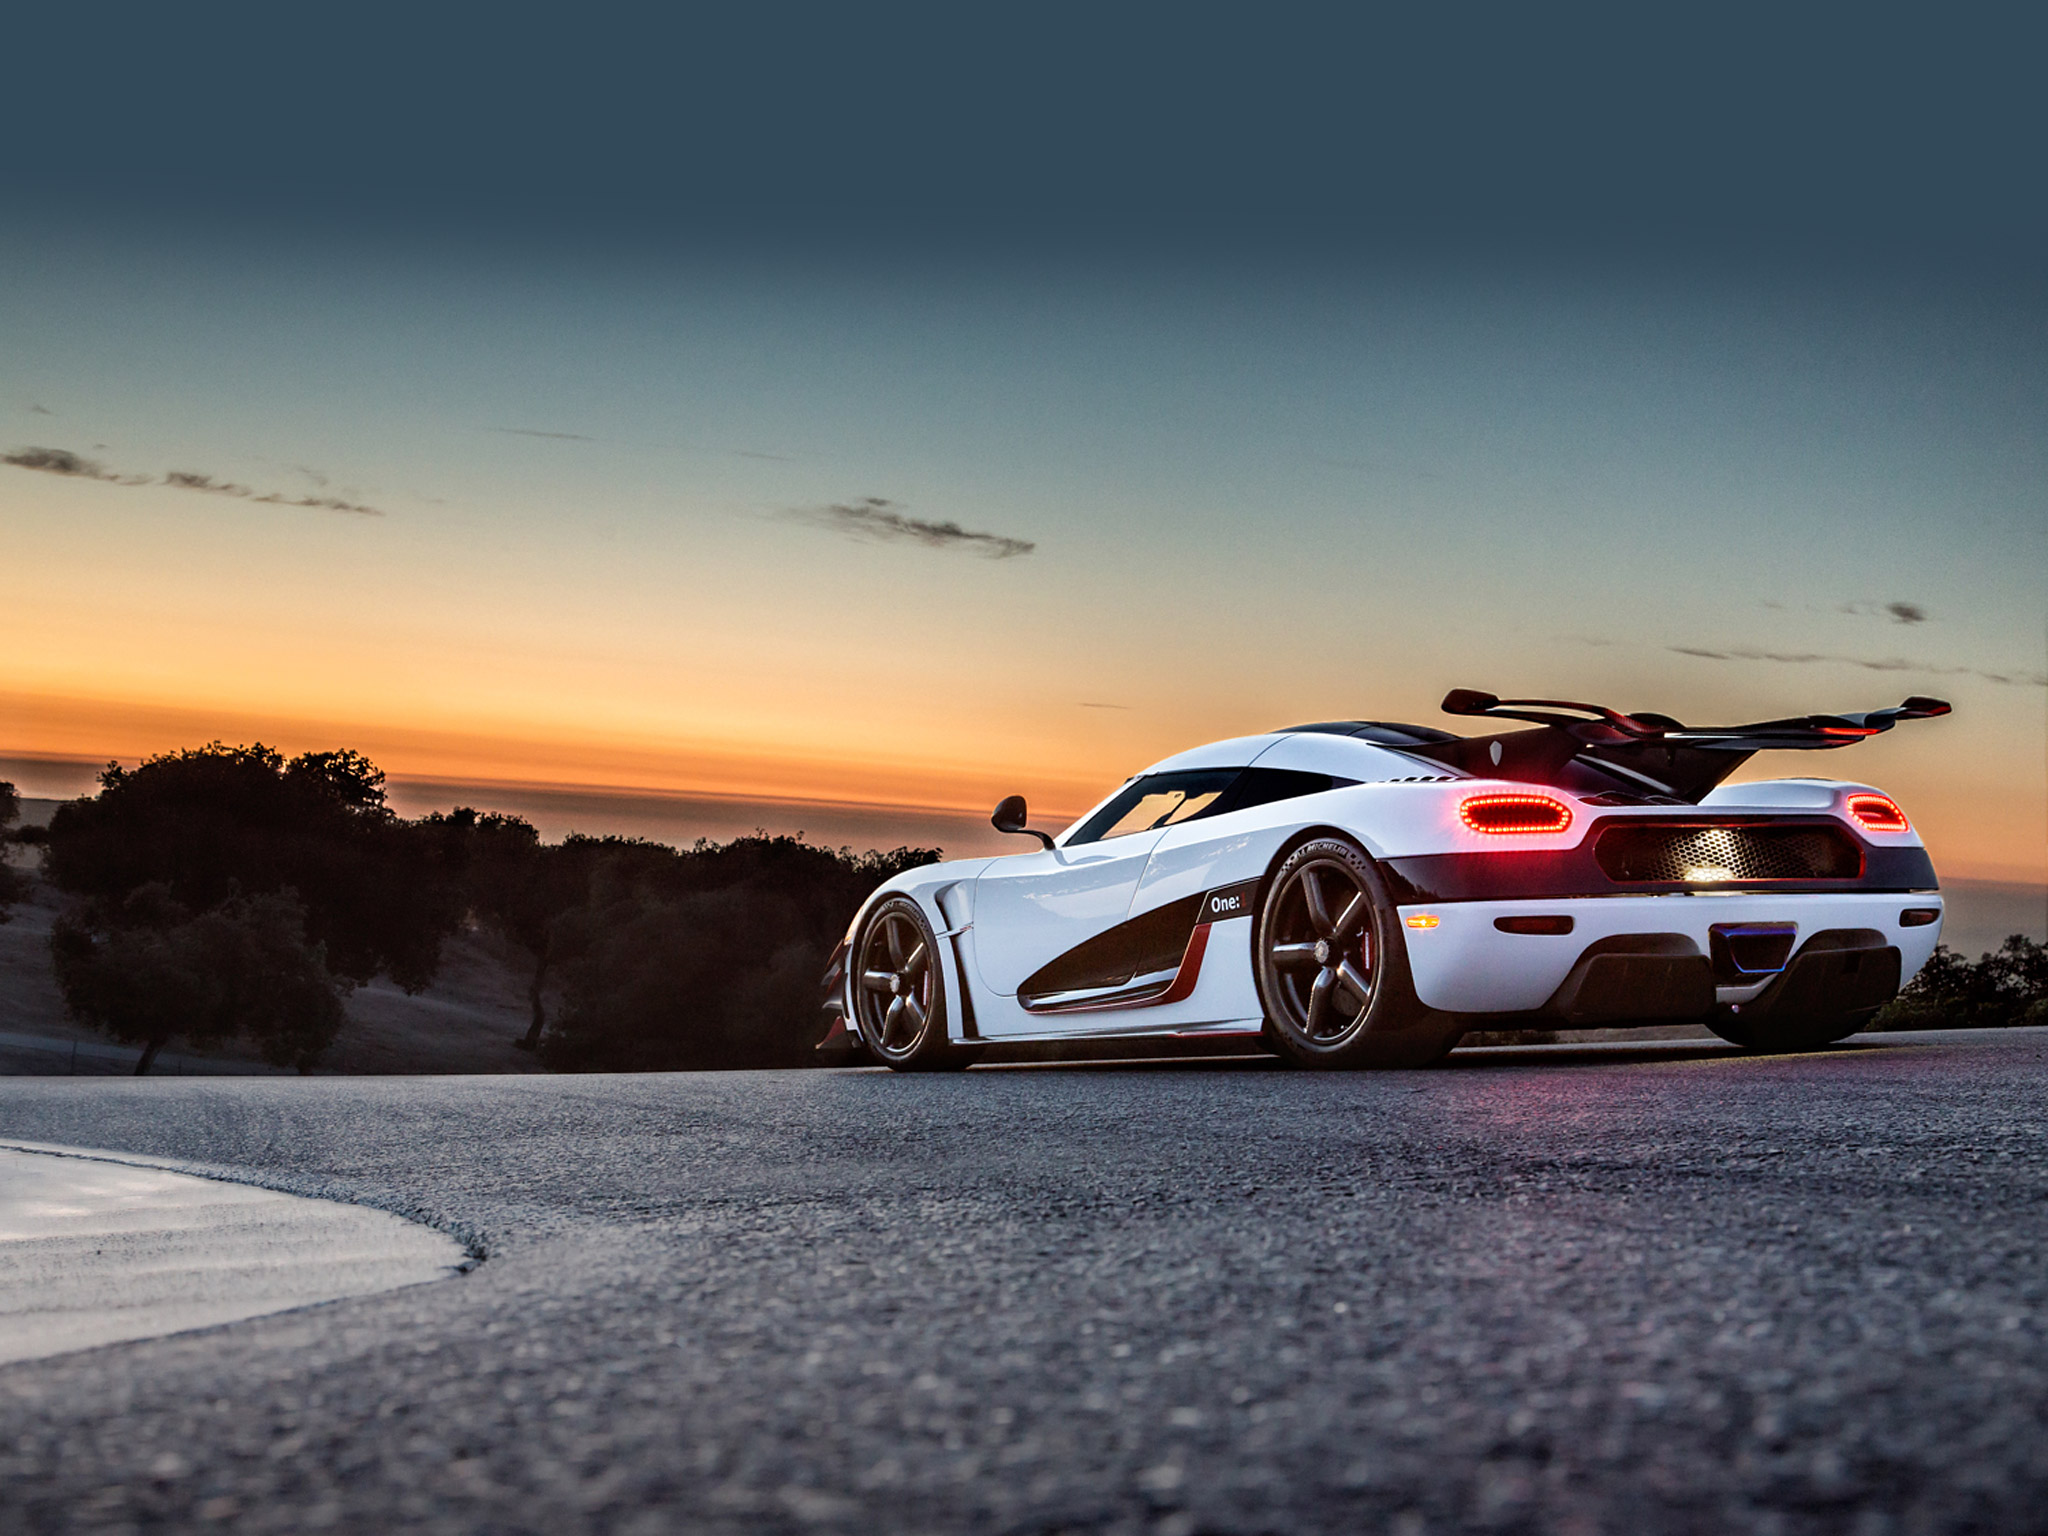 Driven and Survived: 1341-hp Koenigsegg One:1